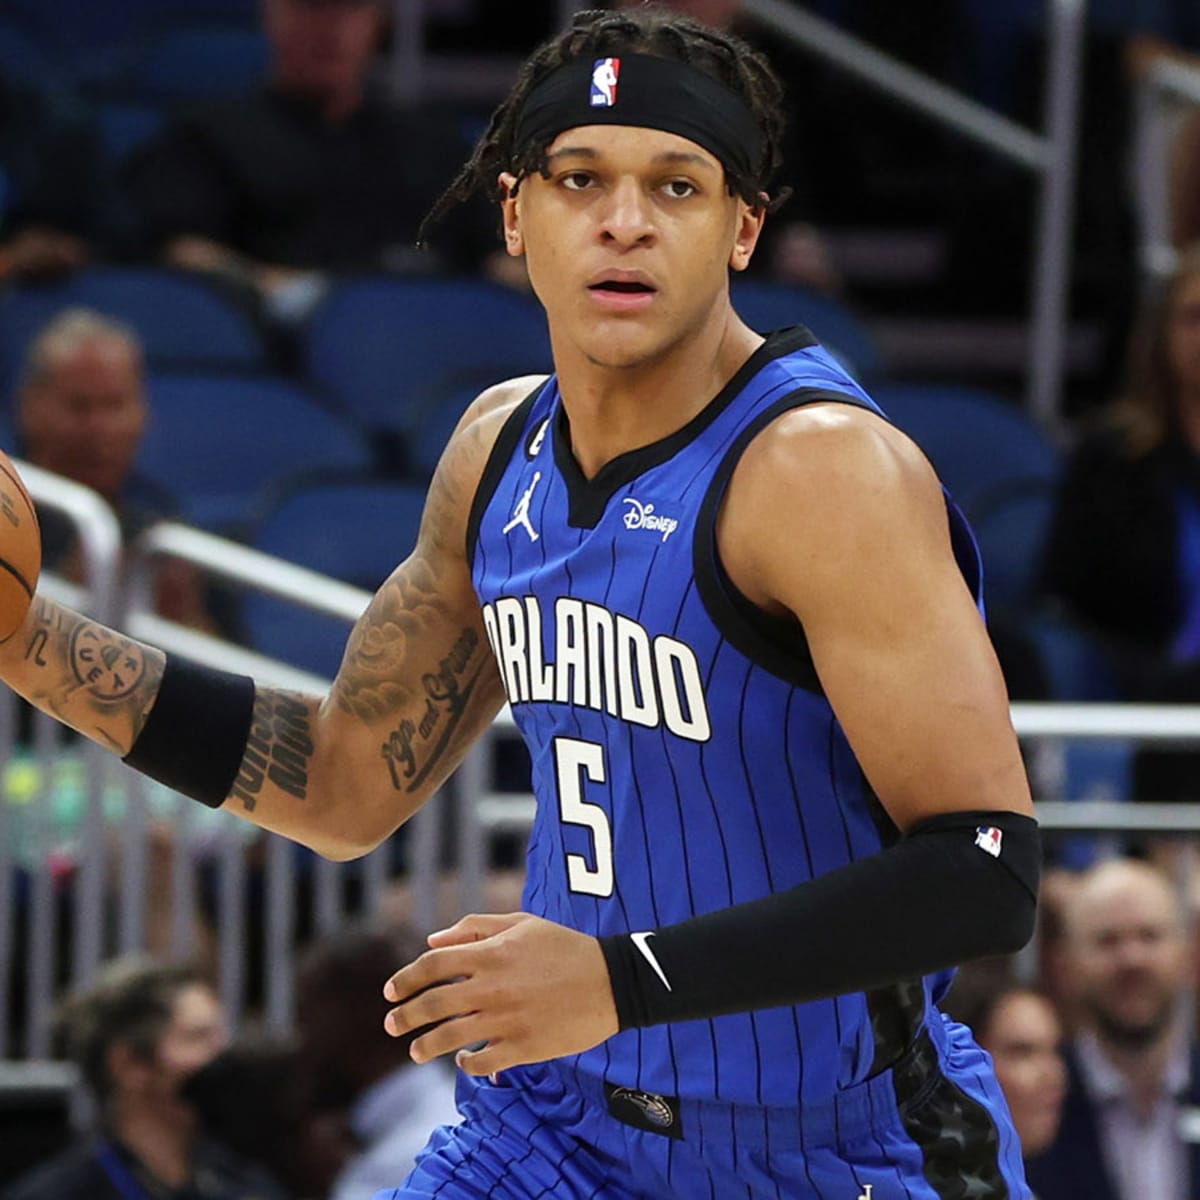 NBA Rookie of the Year rankings: Banchero looks to end top pick struggles